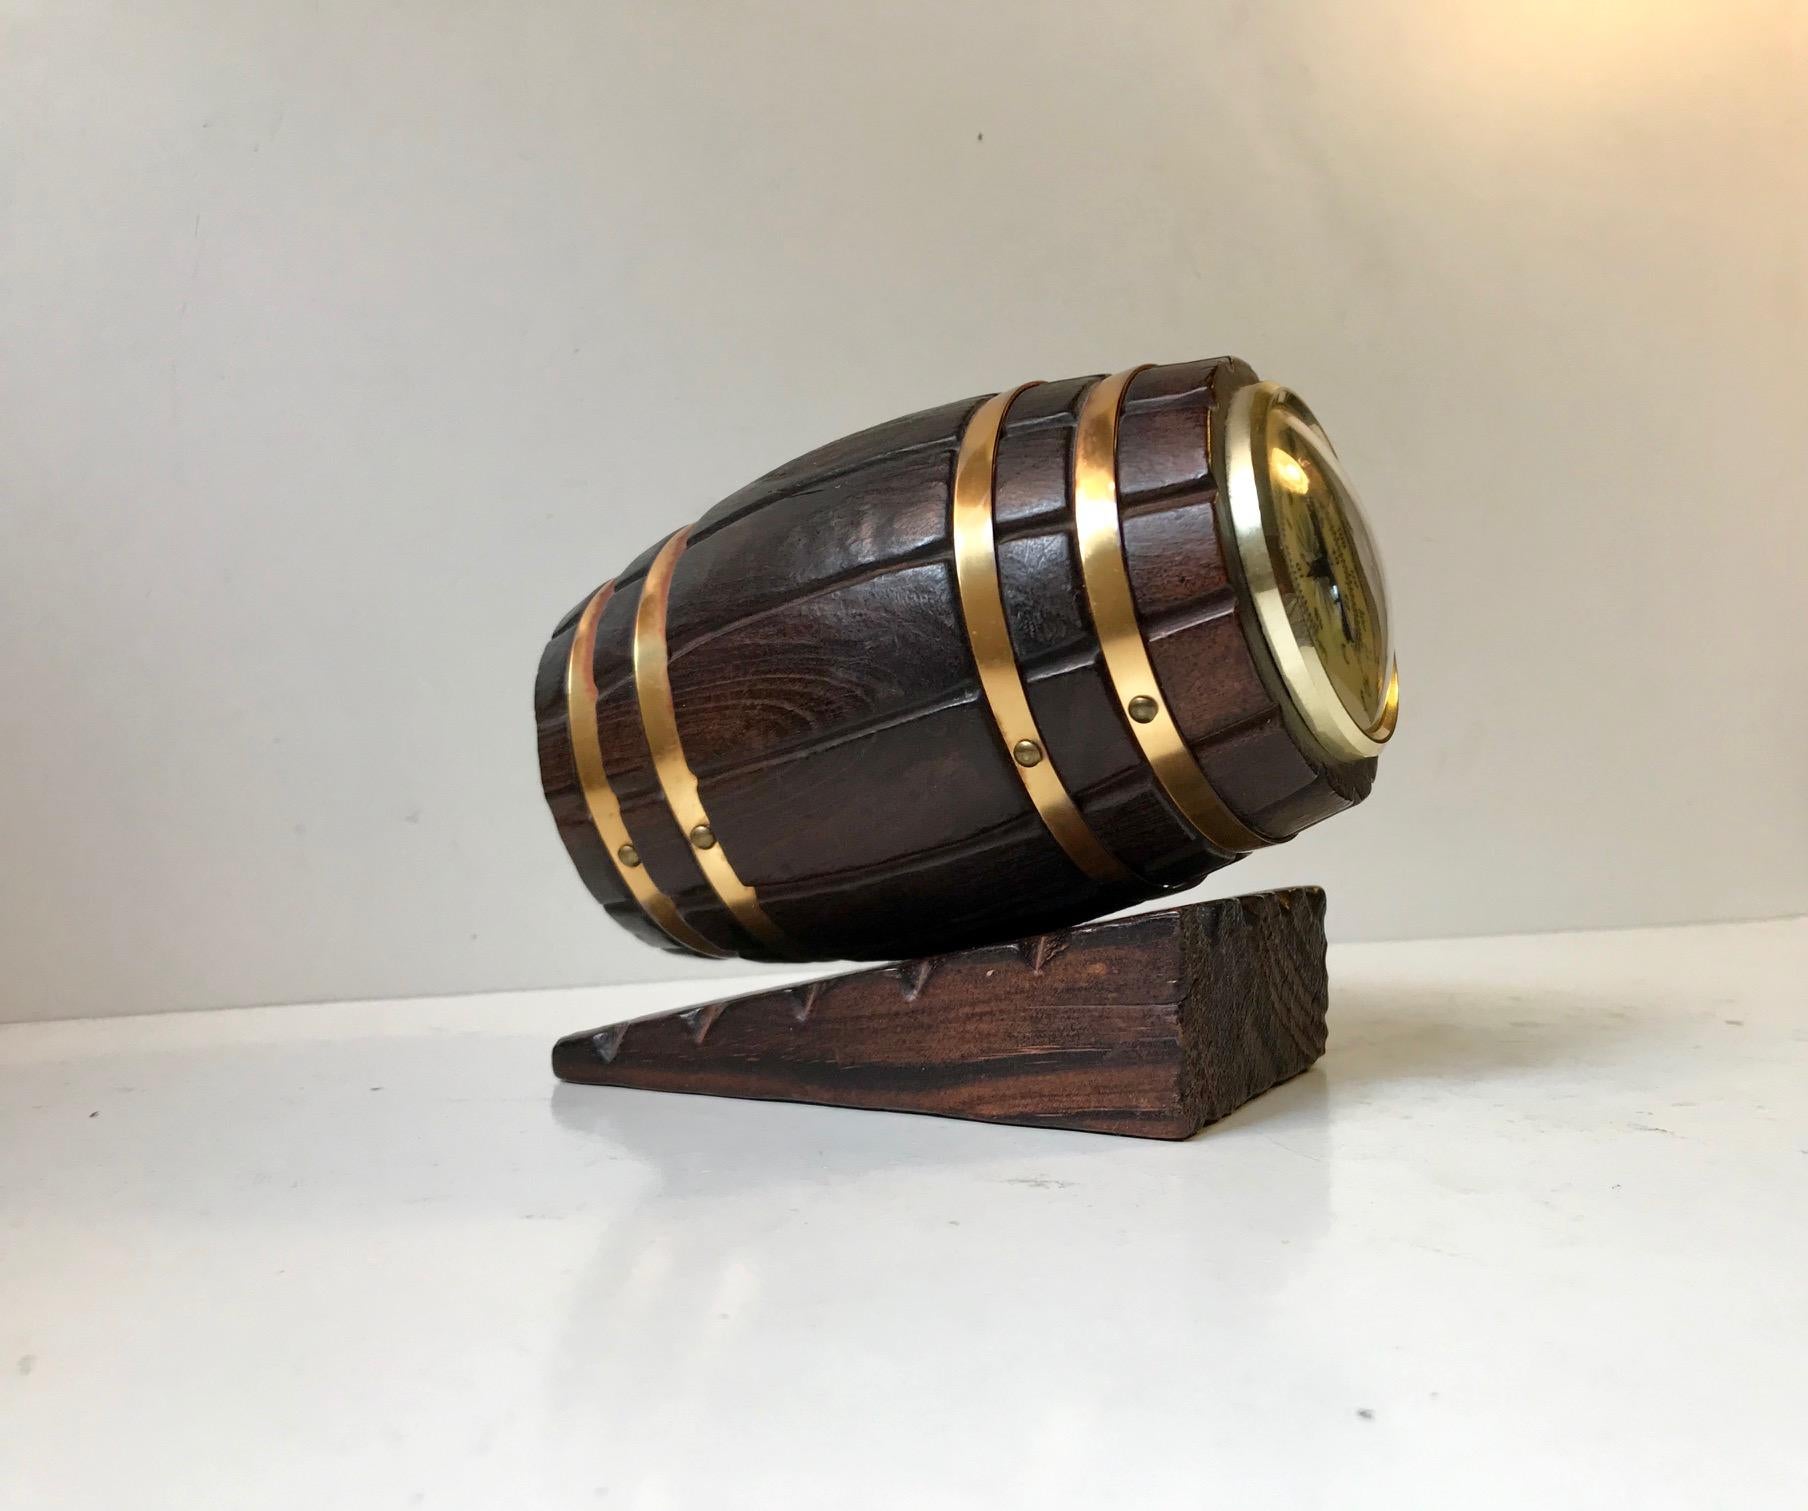 Novelty wine cellar thermometer in shape of a barrel. Its made from solid oak, has brass details and a concave front in plexiglass. It features indicators in both Fahrenheit and Celcius. It would also work as a decorative bookend. Its either of